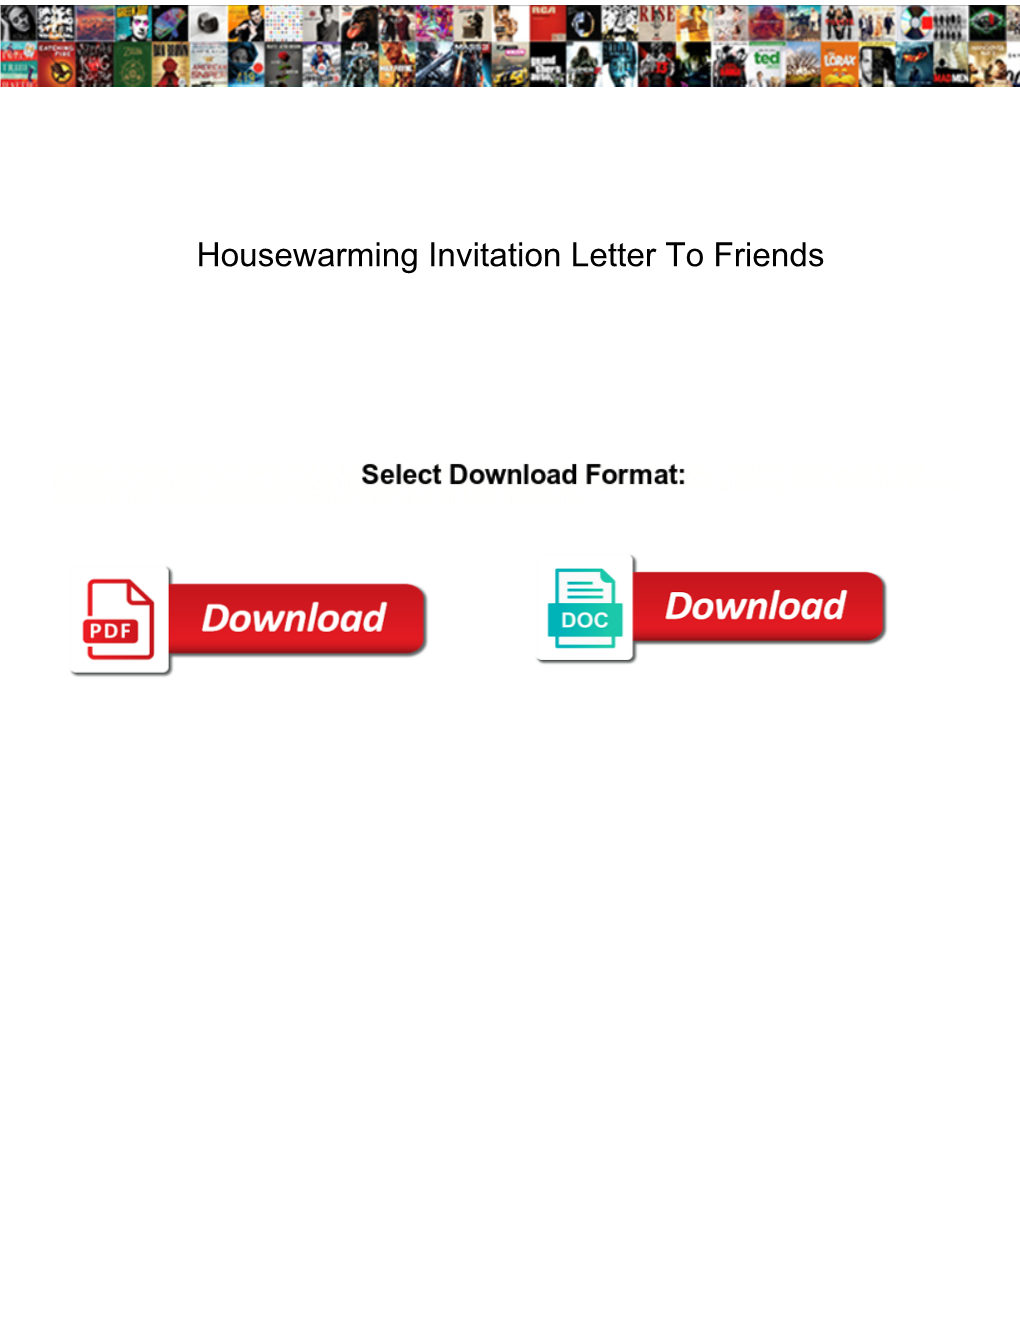 Housewarming Invitation Letter to Friends